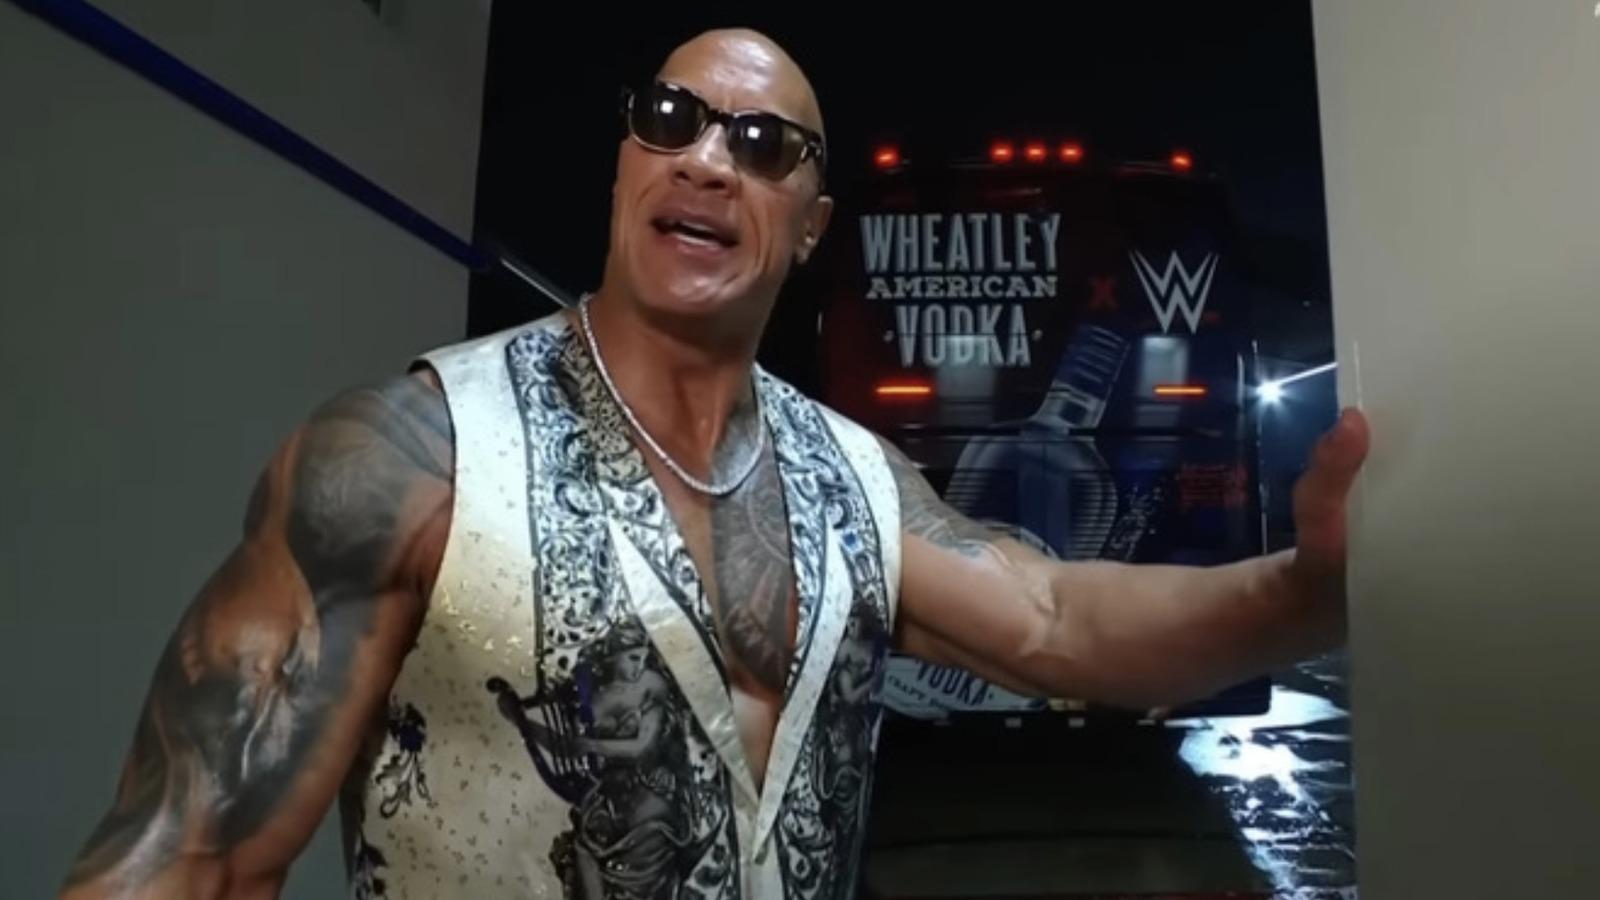 WWE fans claim AEW has stolen the “final boss” catchphrase from The Rock. But this theory was quickly debunked.